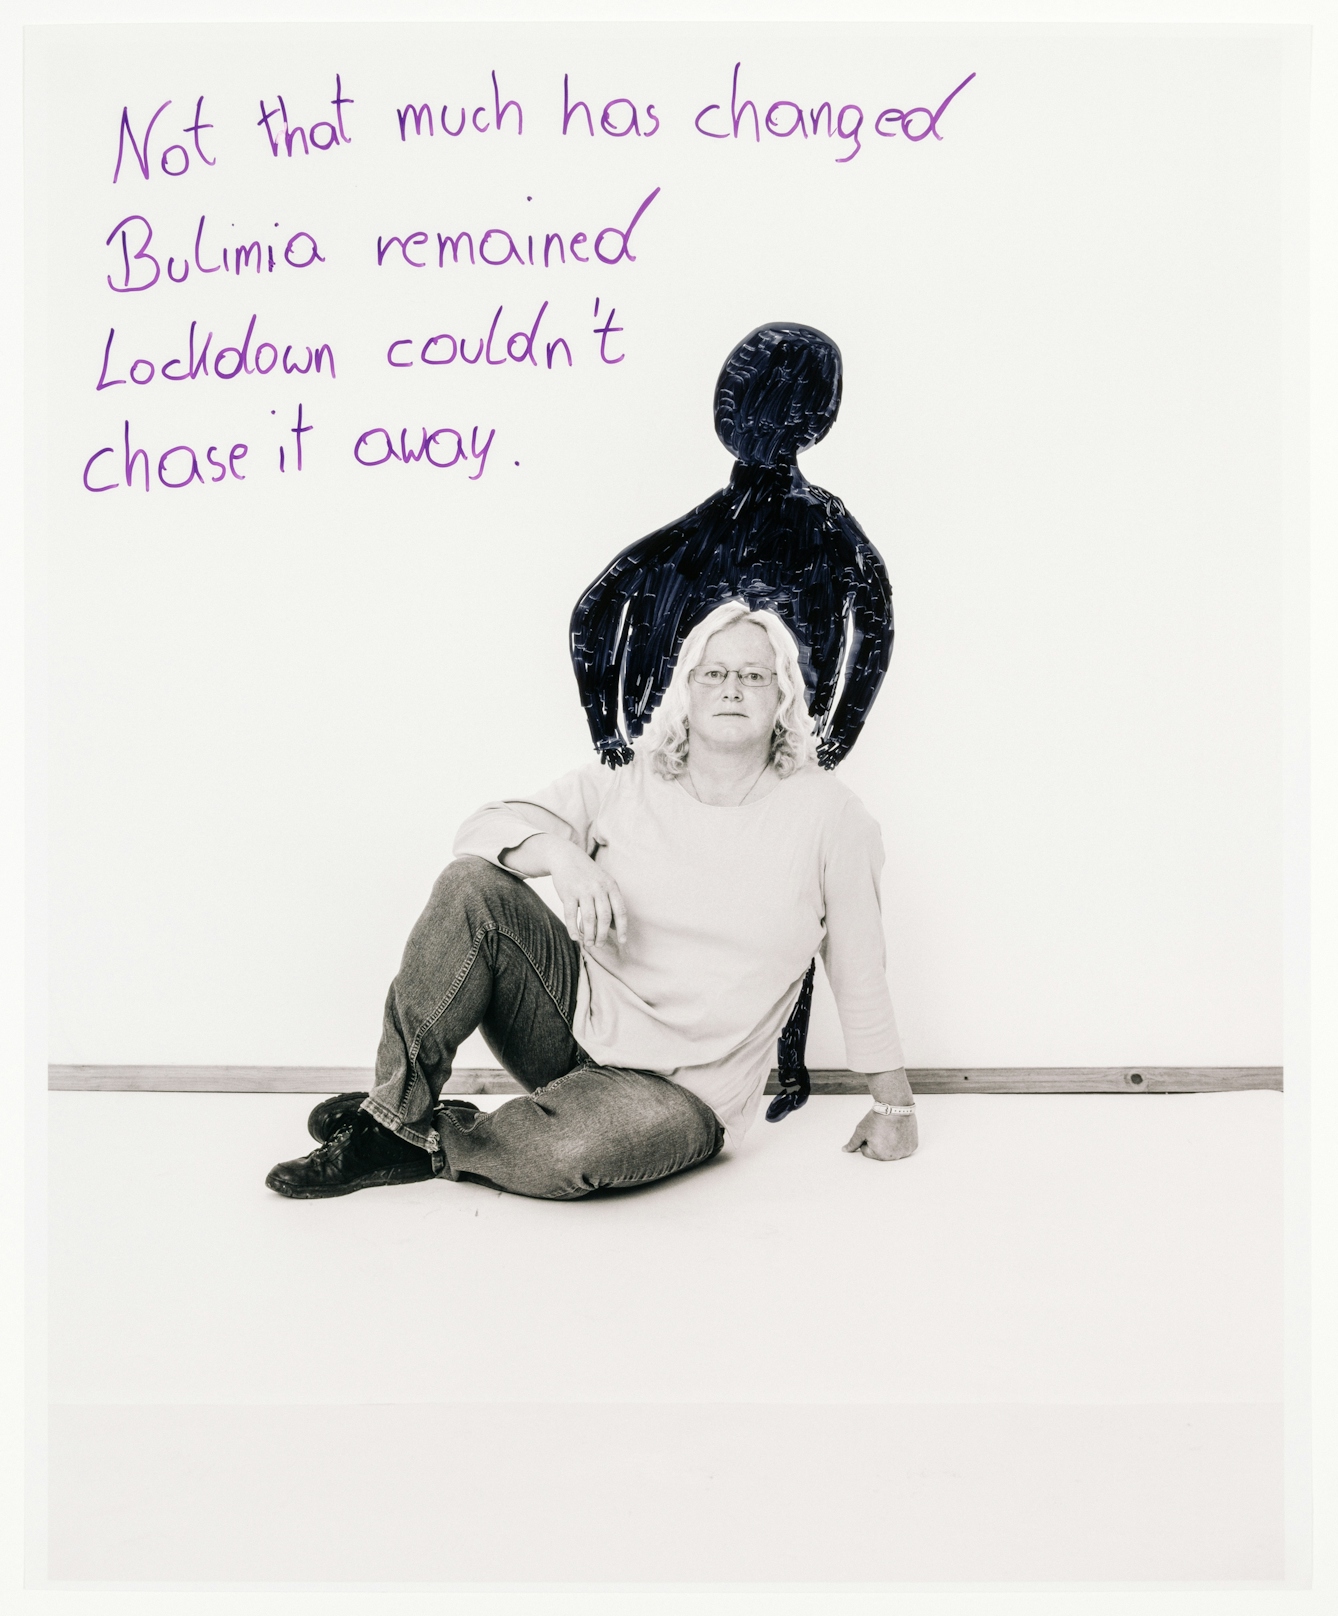 Full body photograph of a woman sitting on the floor with her legs crossed, with one arm resting on her knee and the other supporting her body upright.
Hand drawn behind her is a black figure with its hands resting on the shoulders of the woman.  Behind her, the words “Not that much has changed, Bulimia remained, Lockdown couldn’t chase it away” are written in purple marker.